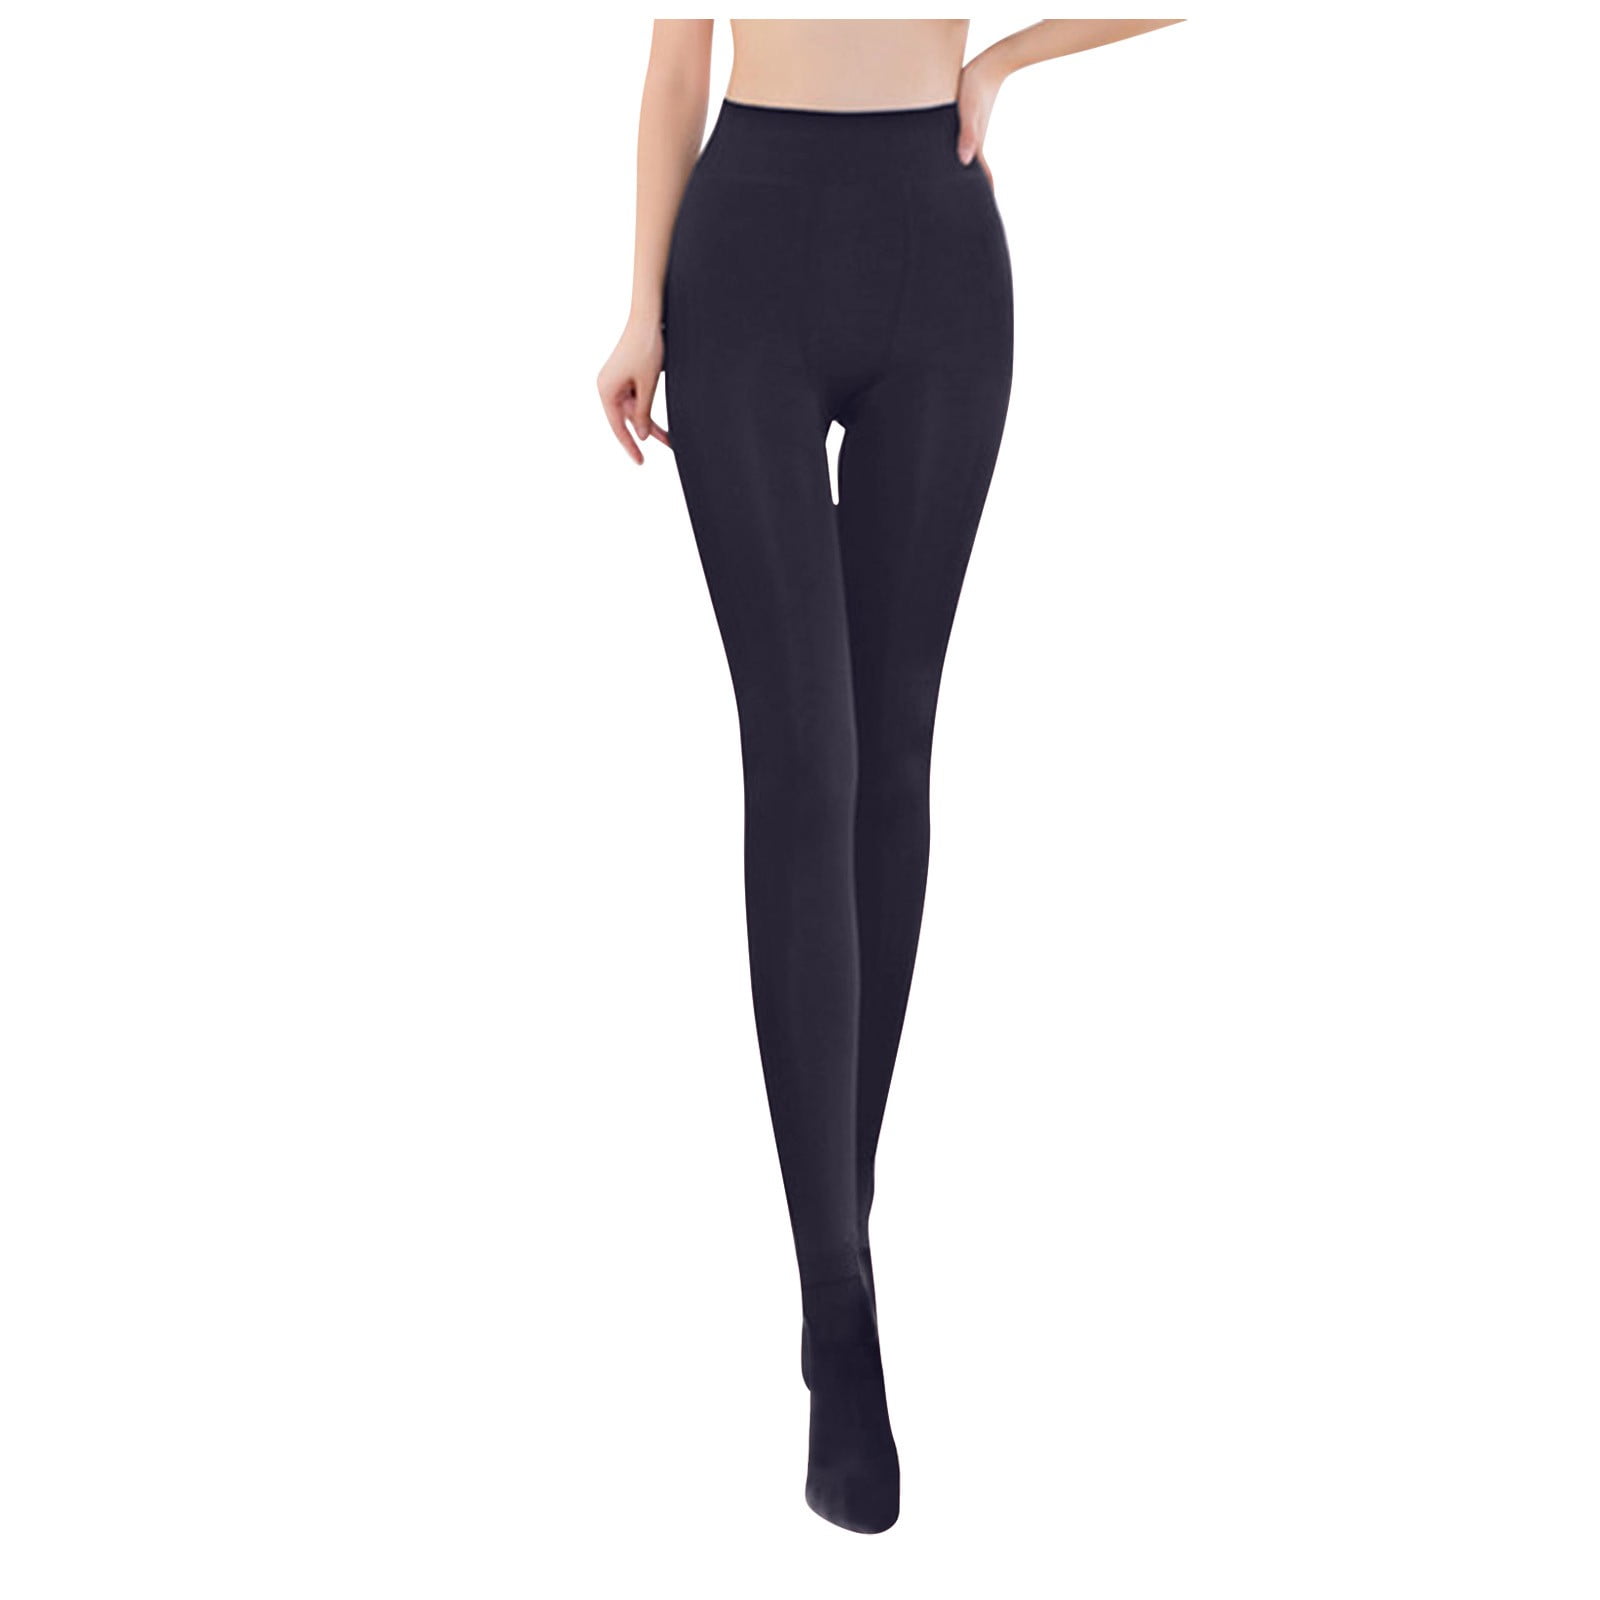 CAICJ98 Workout Leggings Women's Extra Long Leggings Tall Leggings Over The  Heel High Waisted with Back Pockets Green,M 